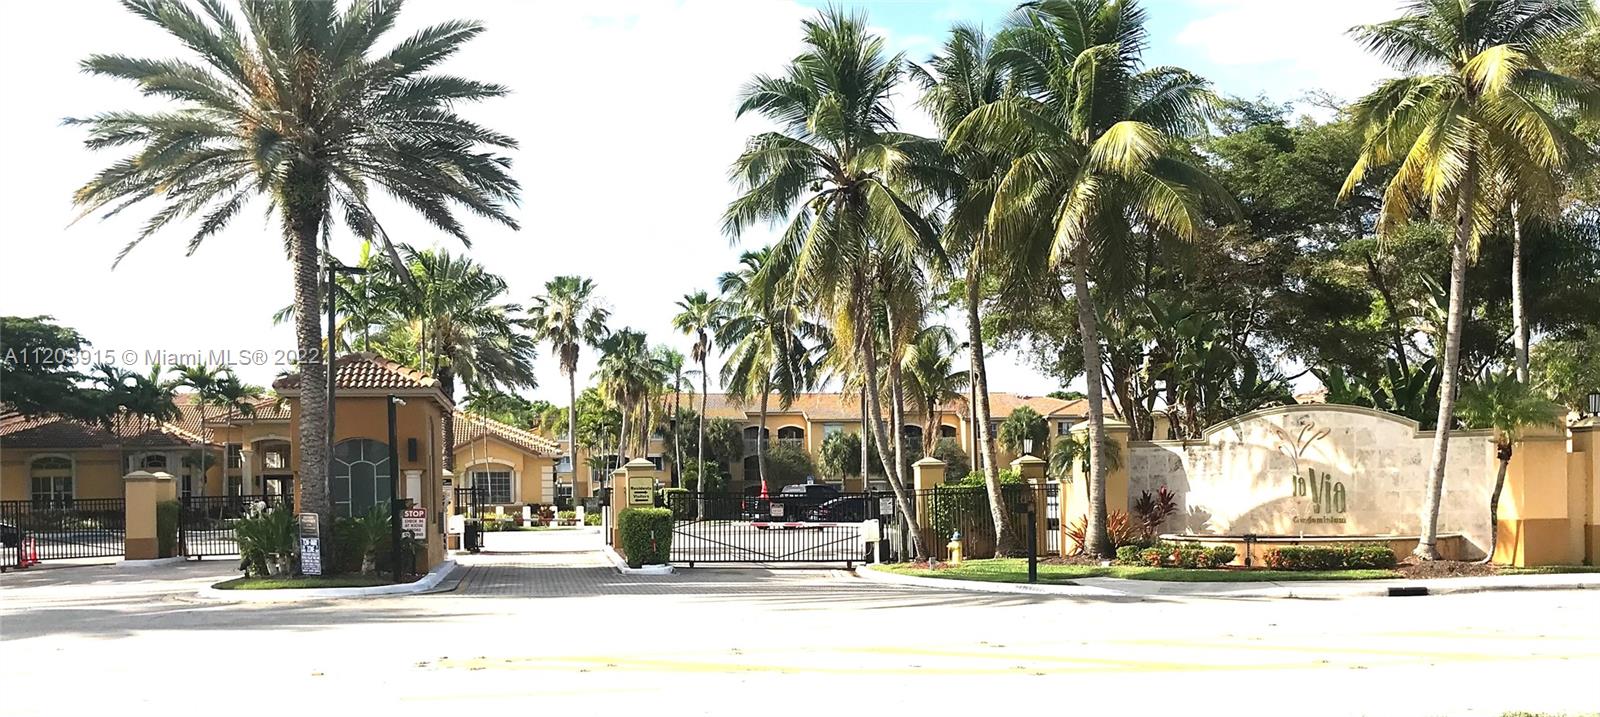 a street view with palm trees